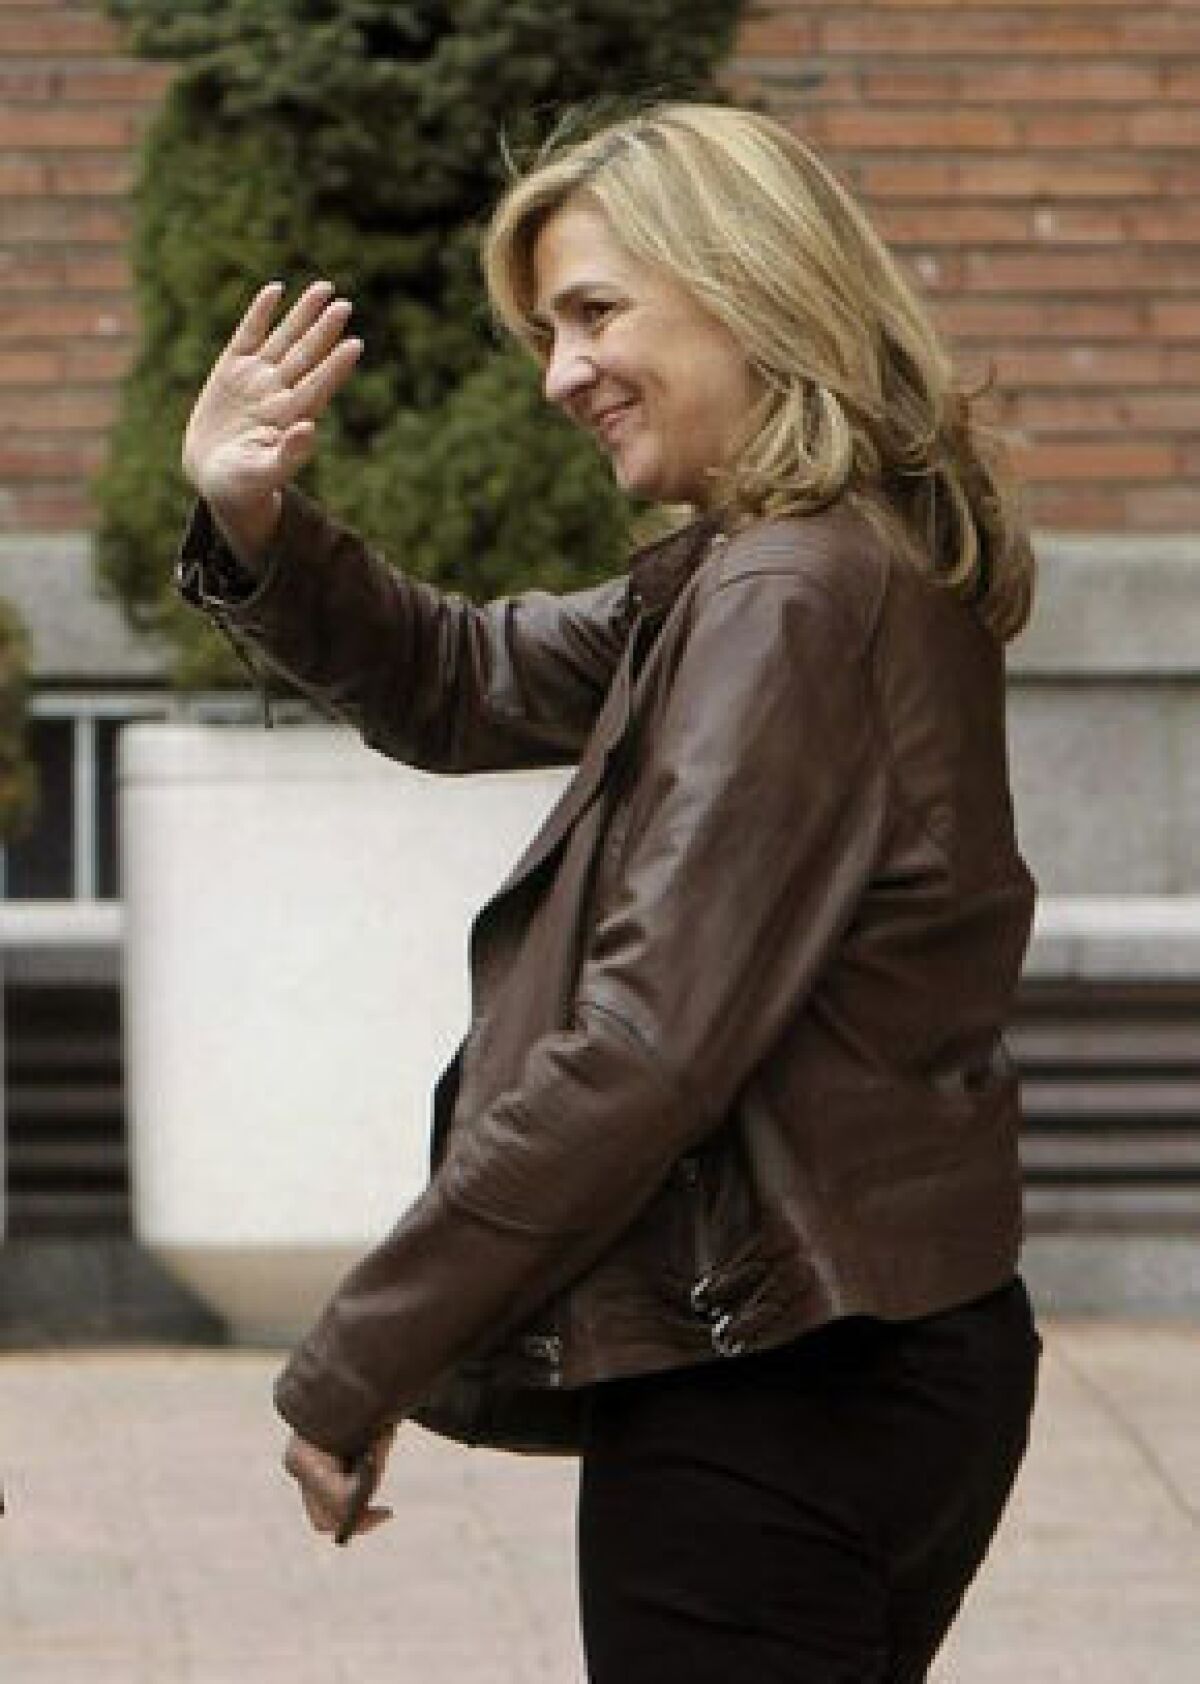 Spain's Princess Cristina, shown in Madrid in March, has been cleared in a corruption probe that has ensnared her husband and thrown a shadow over the royal family.